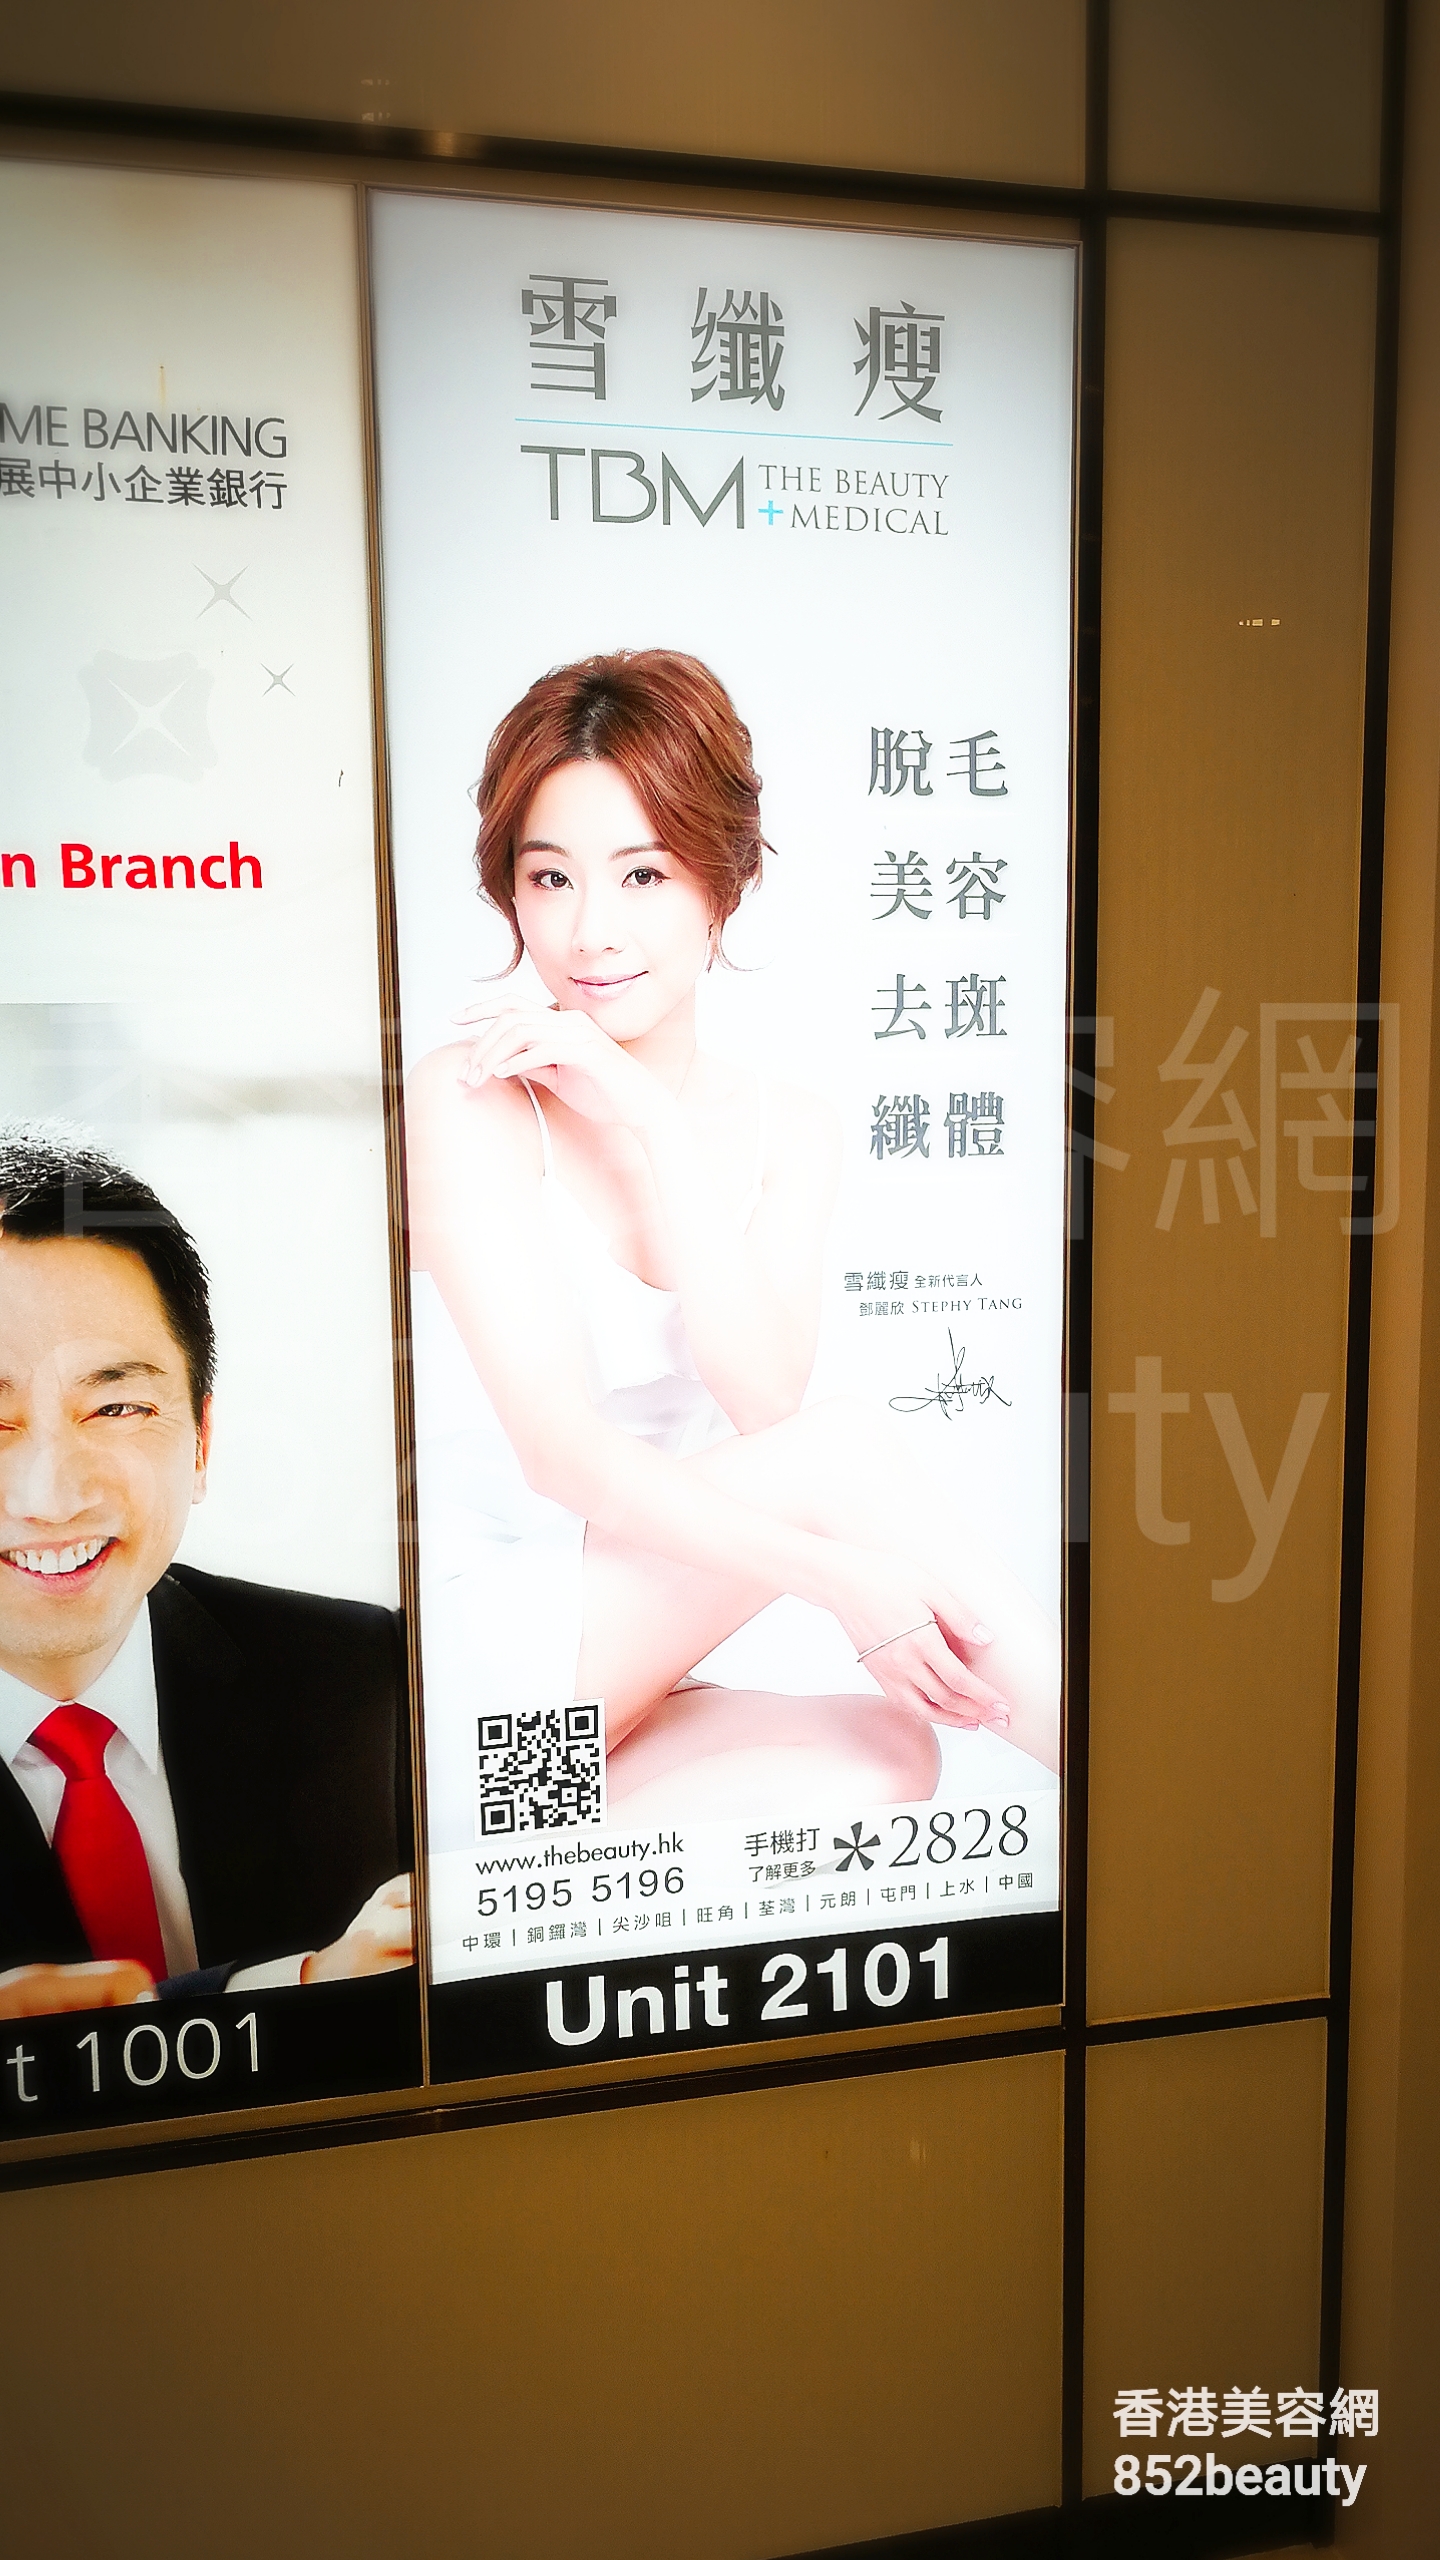 Hair Removal: 雪纖瘦 The Beauty  荃灣店